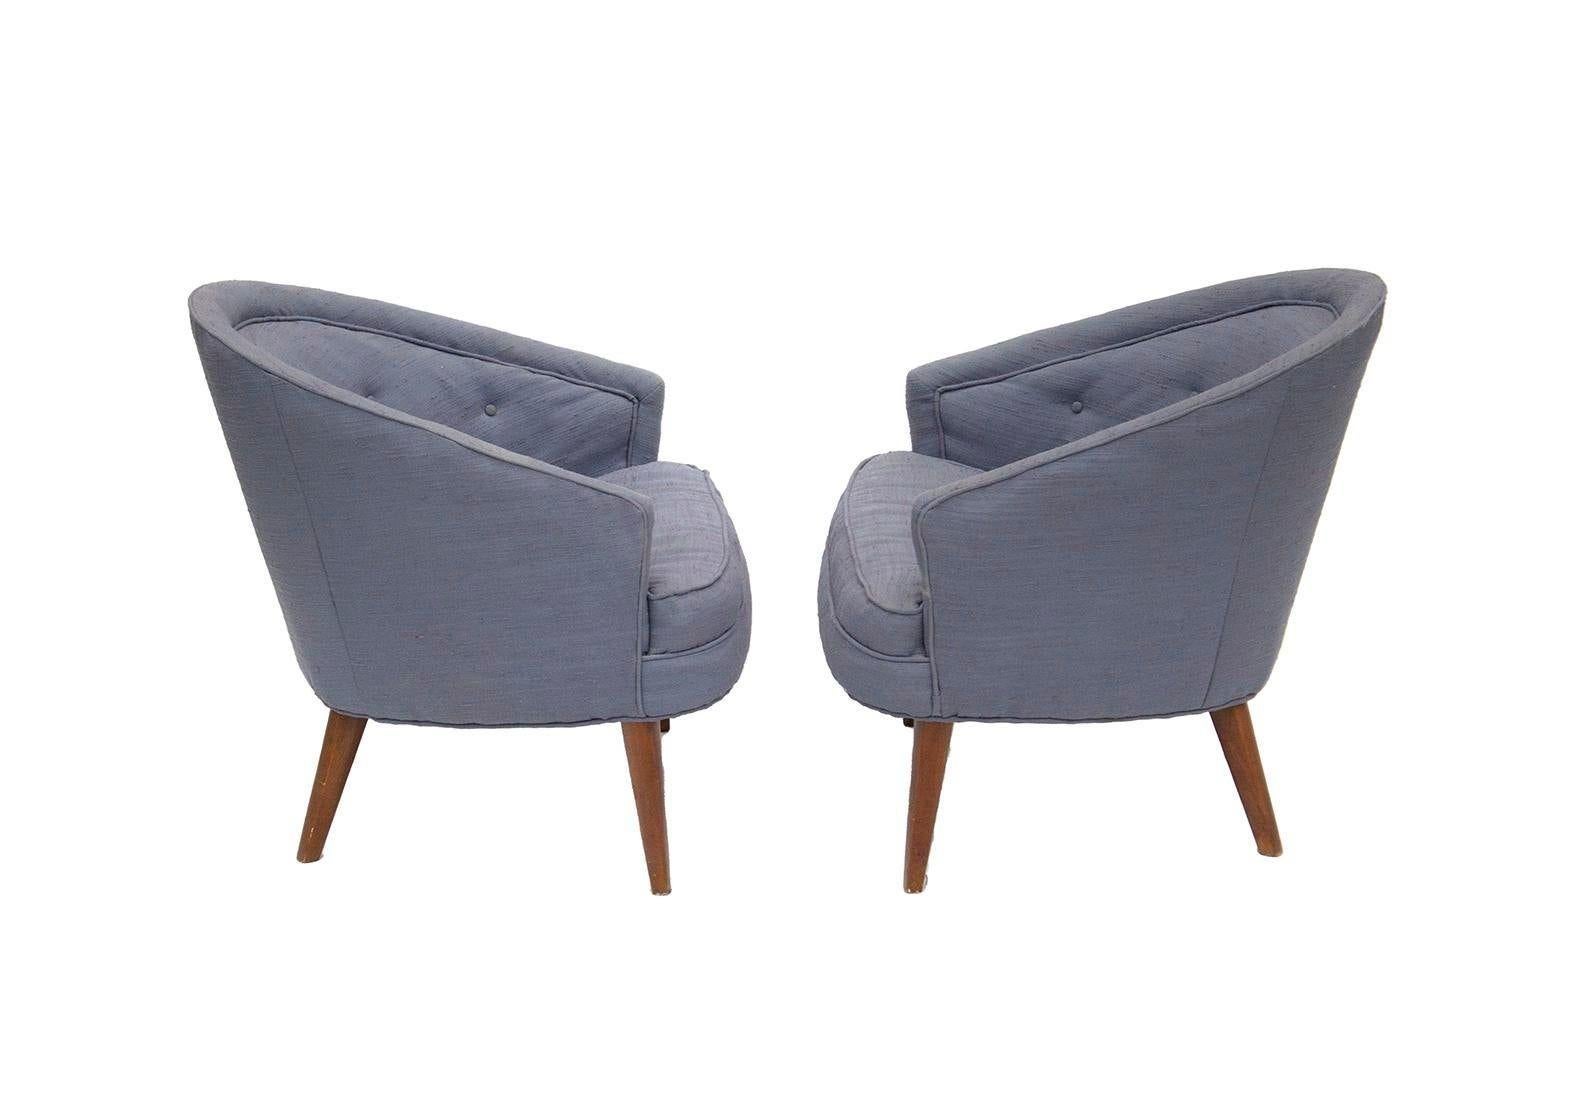 Fabric Petite Pair of Tufted Mid-Century Armchairs For Sale